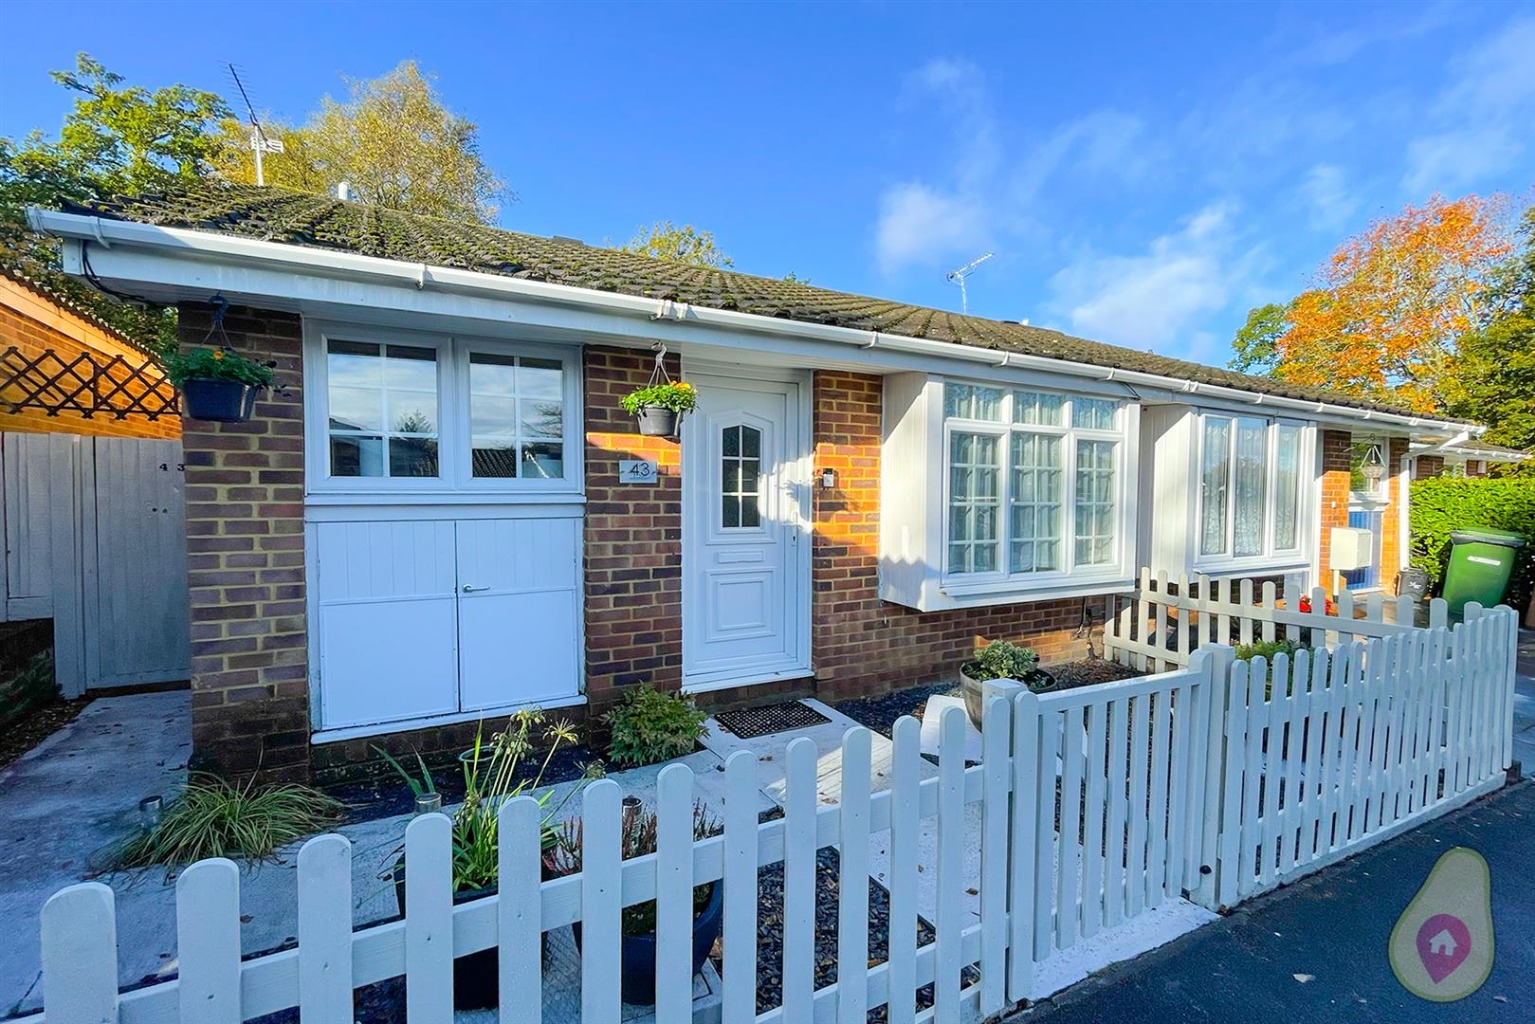 * CORNER PLOT BUNGALOW * WATCH THE VIDEO TOUR *  Marketed by Ellen & Sanjay.  Garage accessed via the garden, and a corner plot garden that rivals most four bedroom houses!